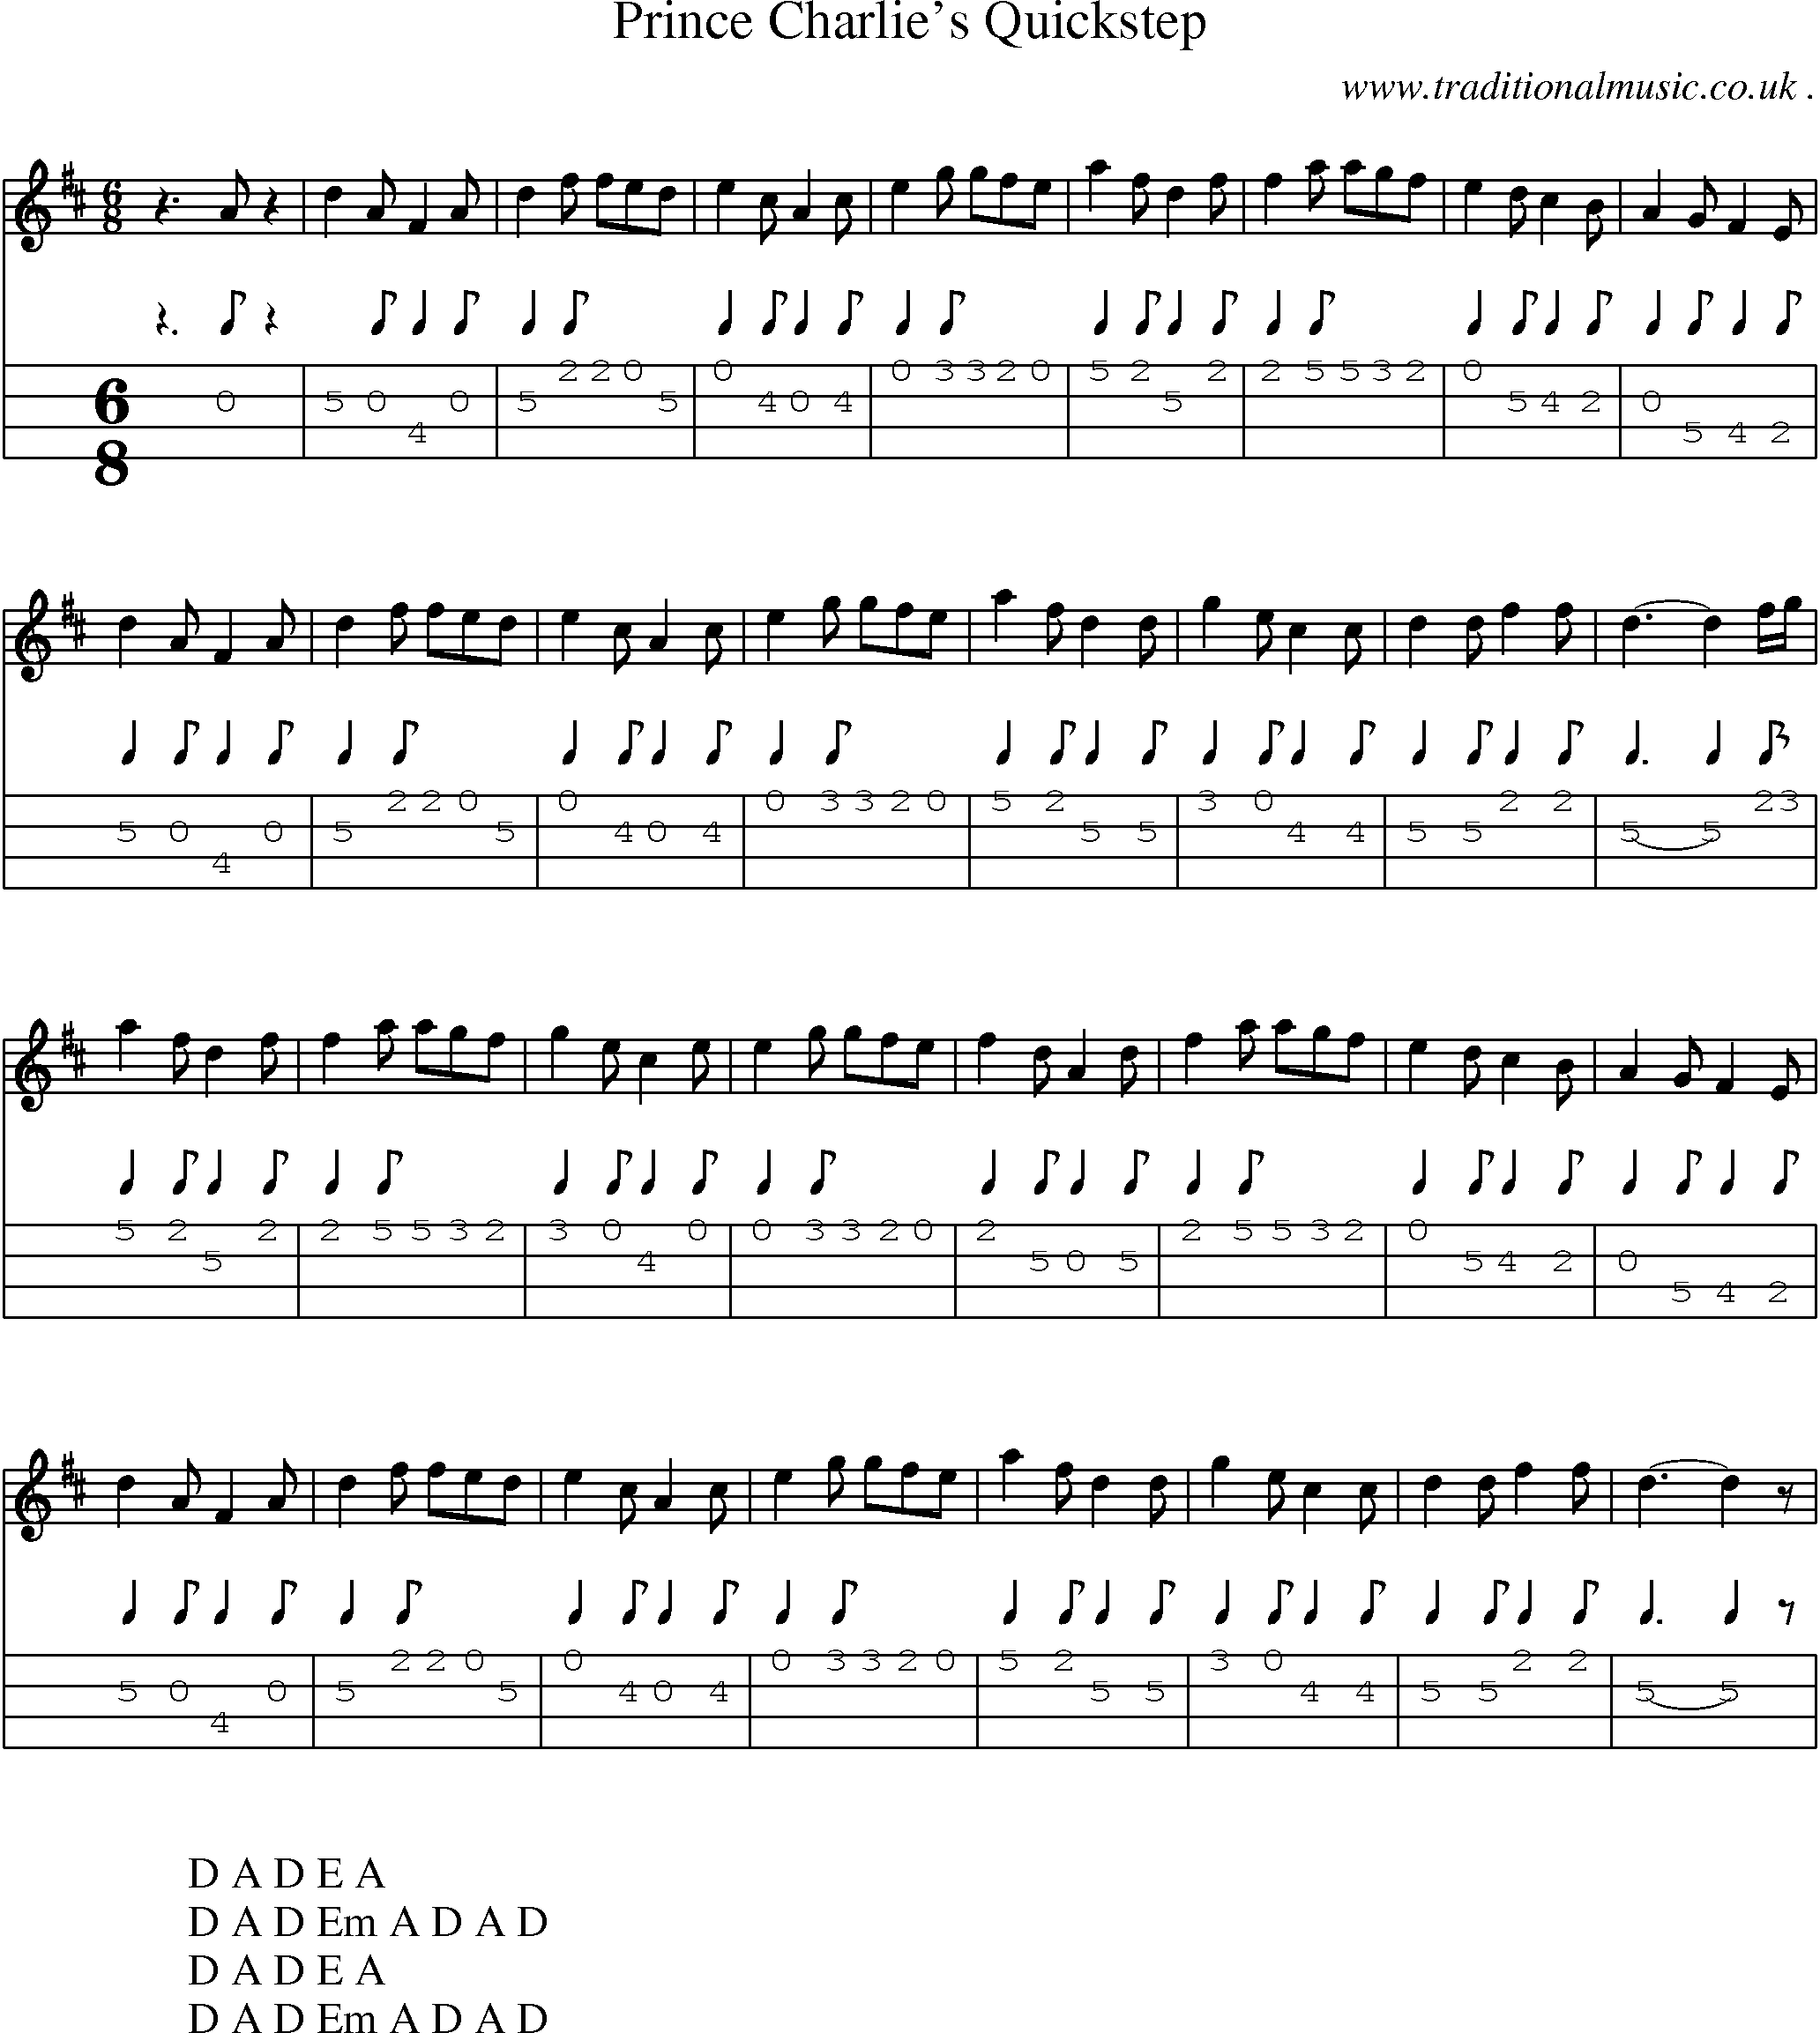 Sheet-music  score, Chords and Mandolin Tabs for Prince Charlies Quickstep